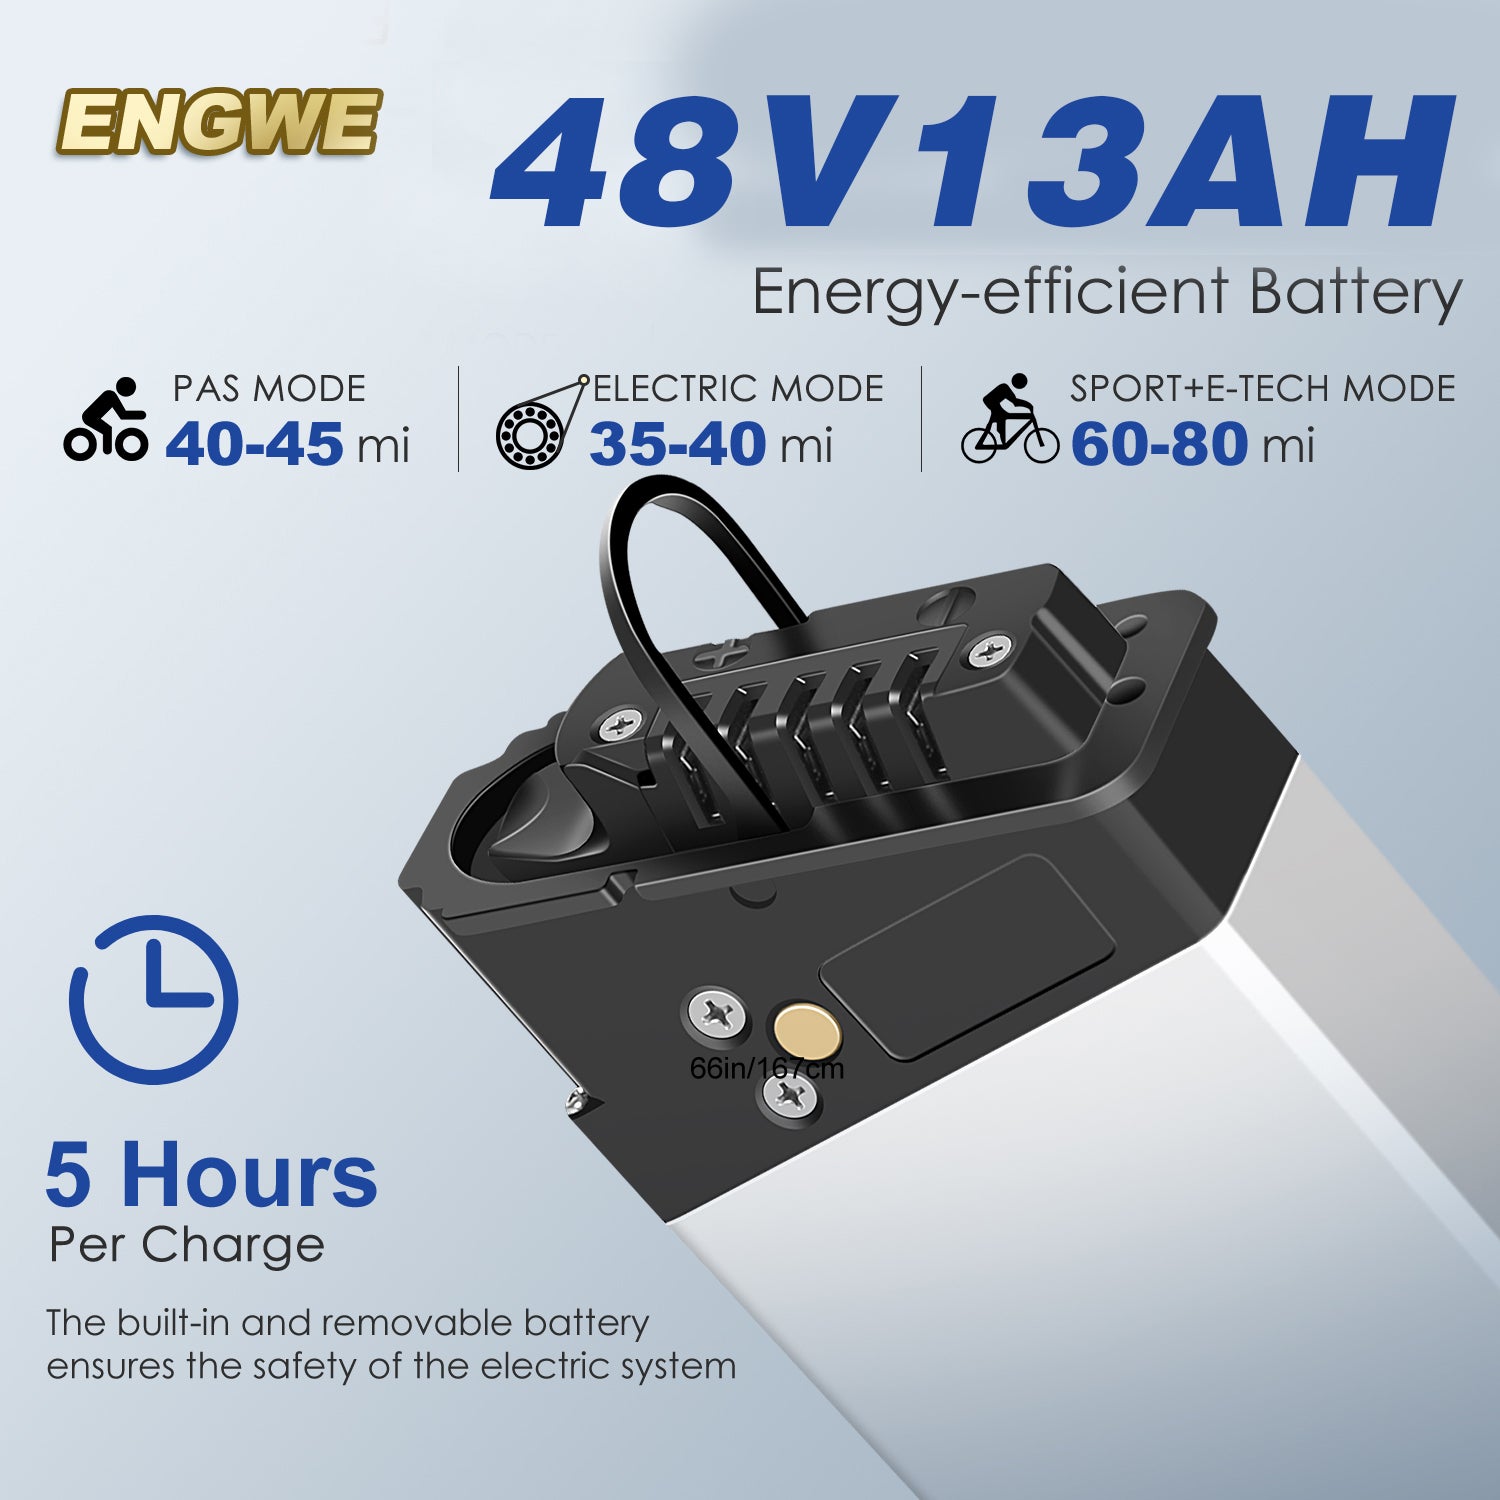 Engwe EP-2 Pro's 48V 13Ah energy-efficient battery, offering various riding modes and long-lasting performance.